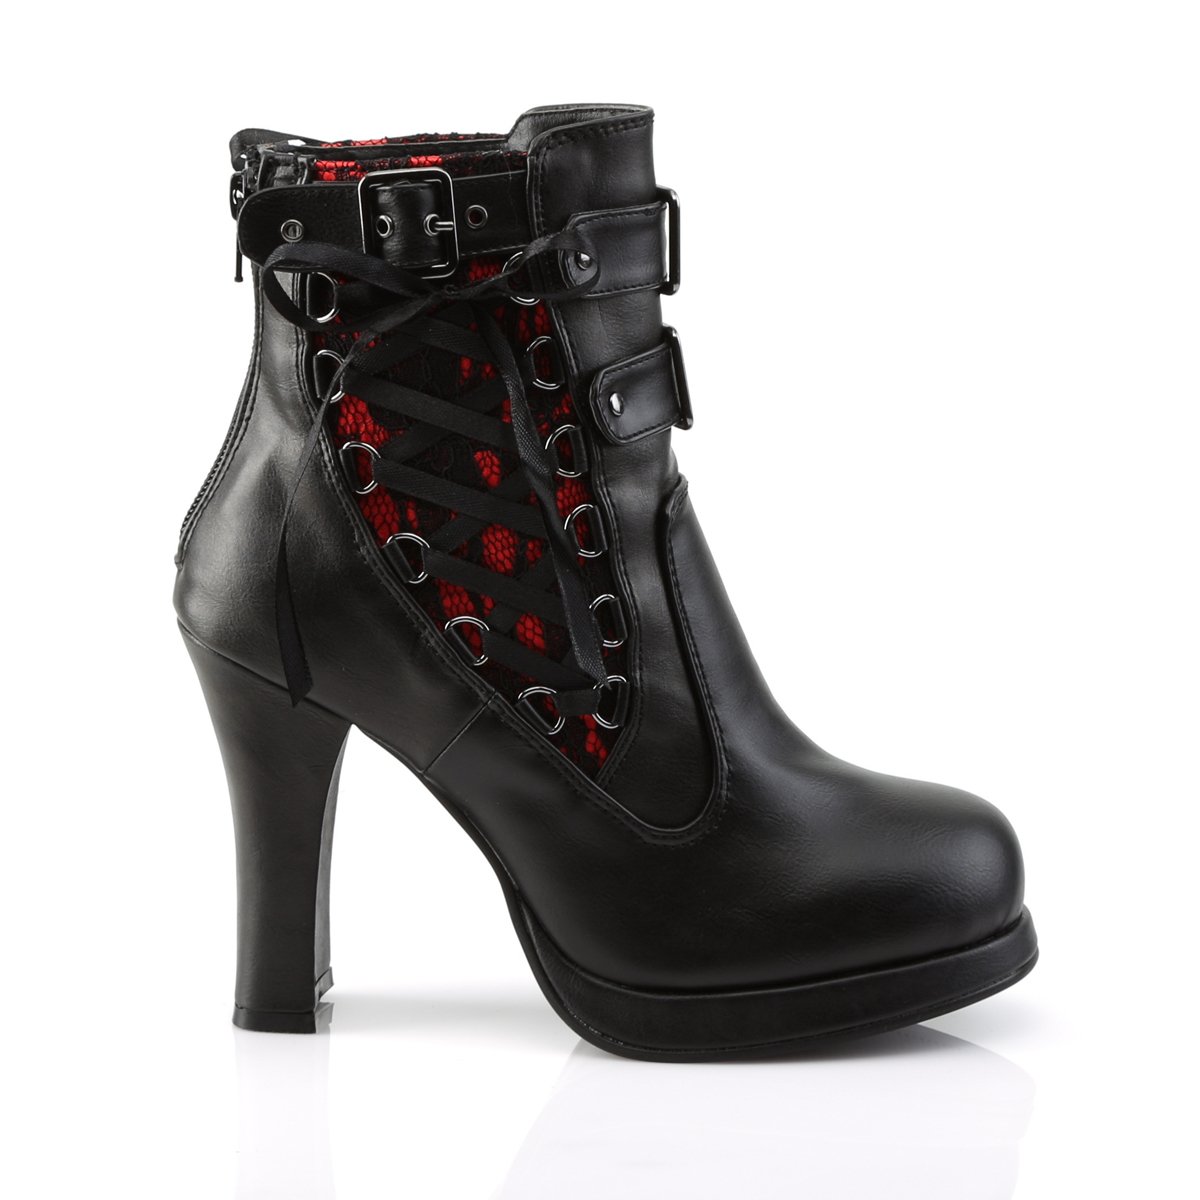 Demonia Crypto-51 Women's Ankle Boots | Buy Sexy Shoes at Shoefreaks.ca